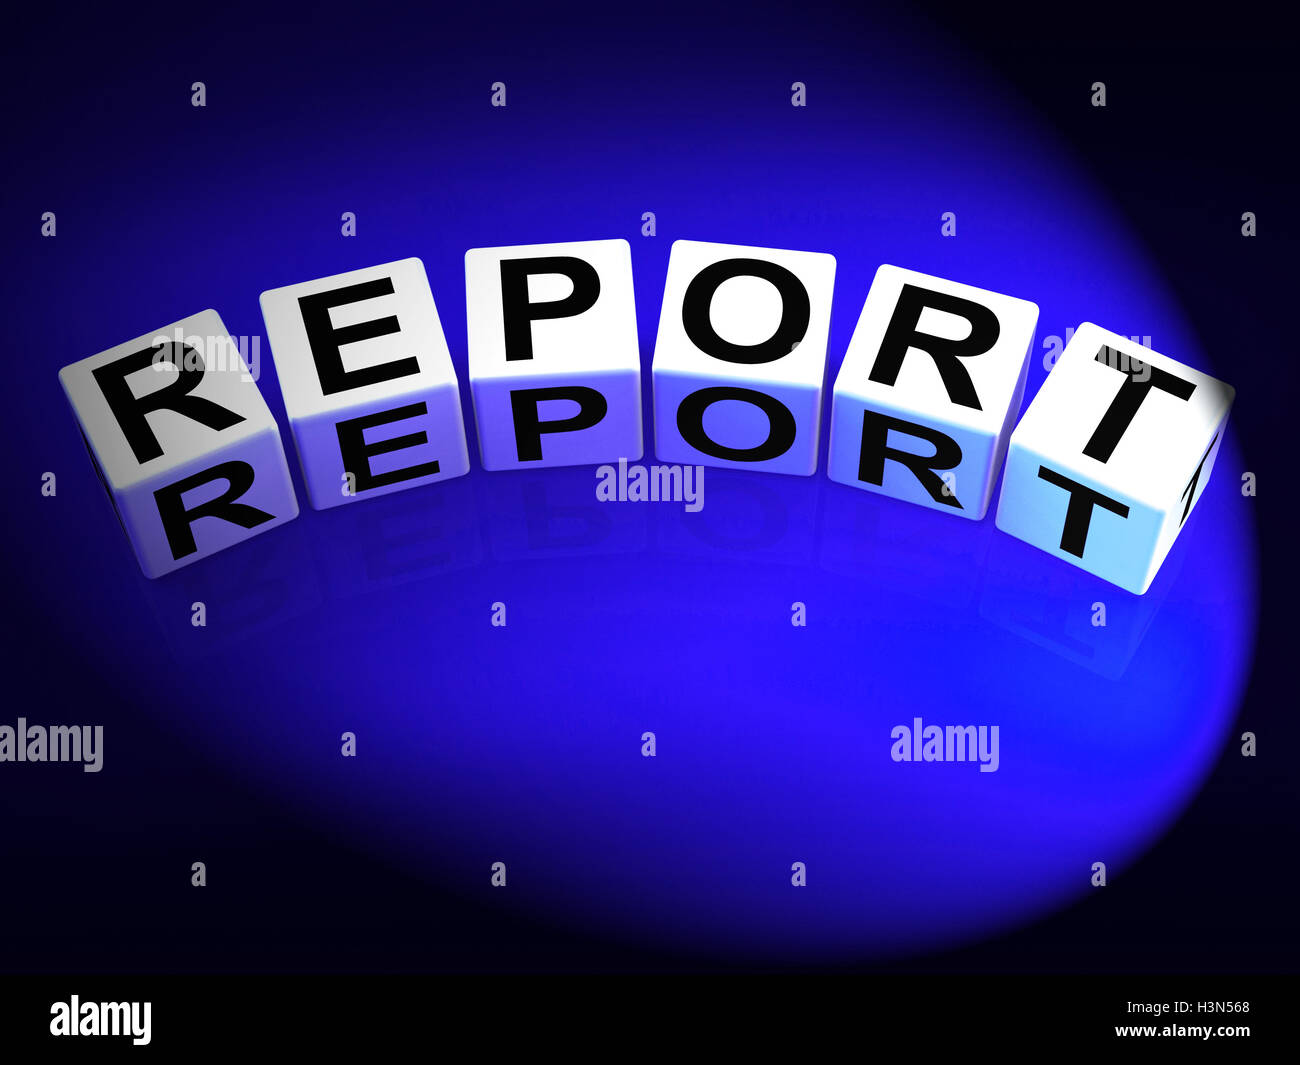 Report Dice Represent Reported Information or Articles Stock Photo